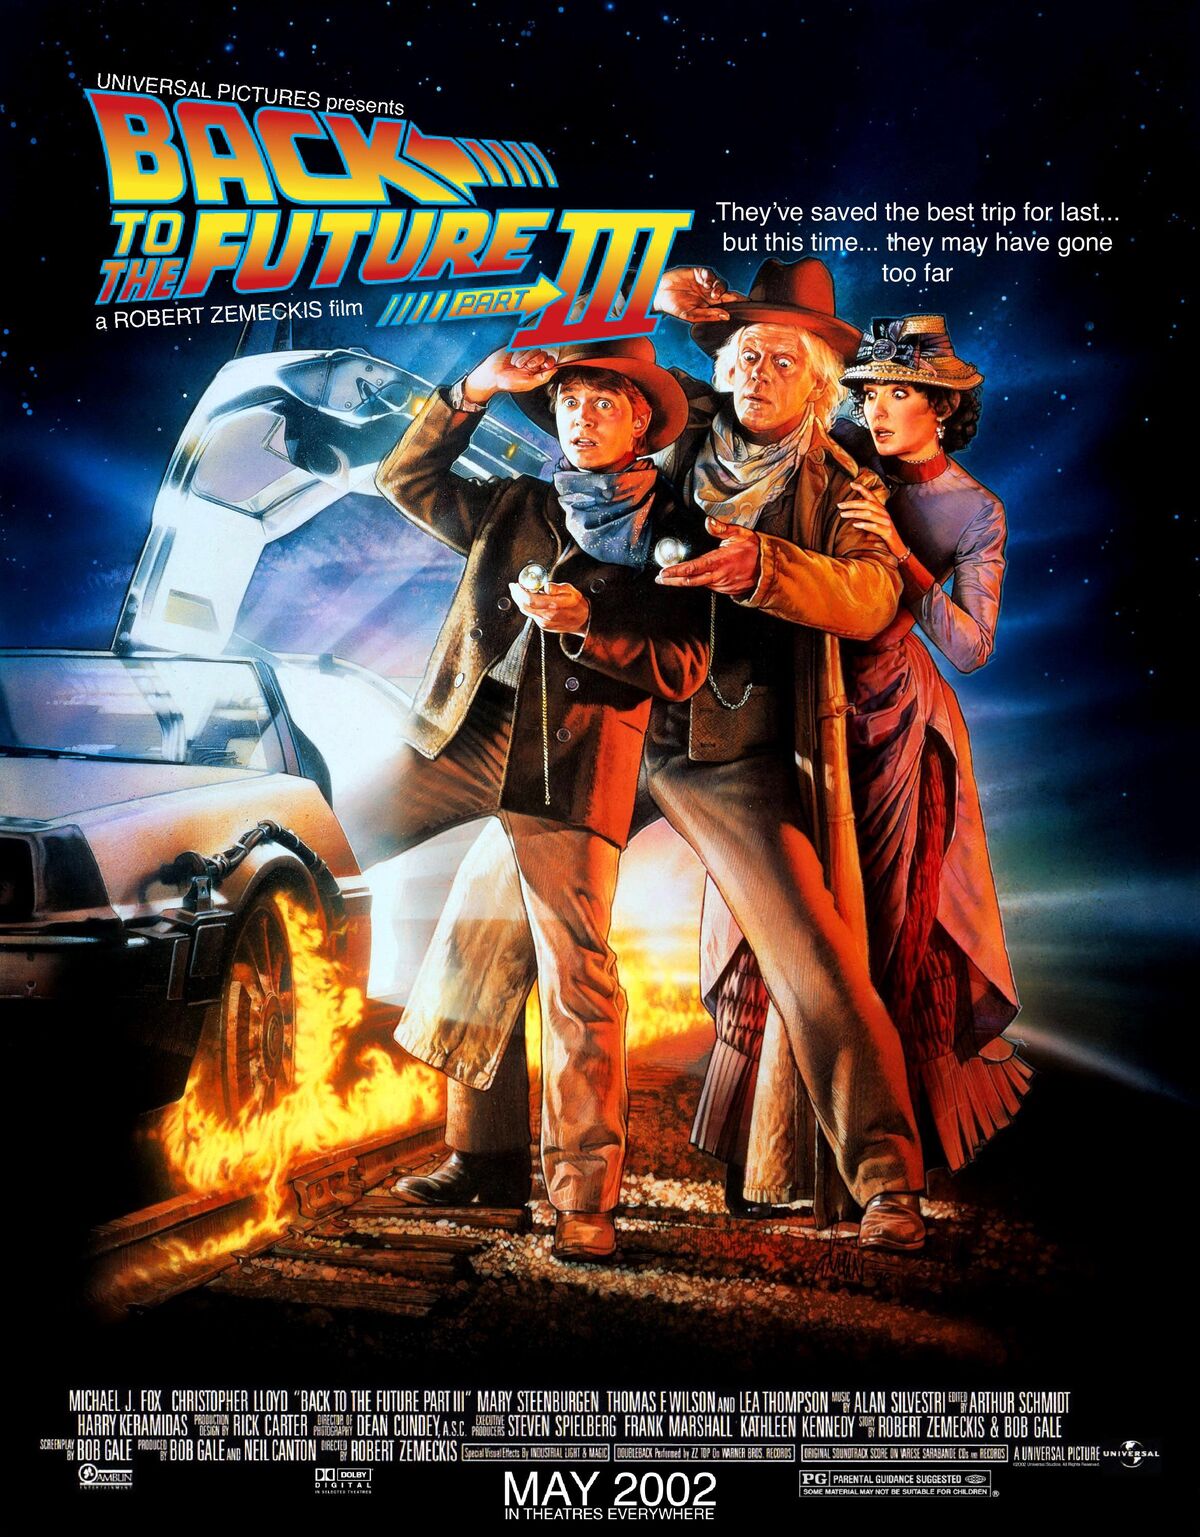  Back to the Future Now - Live at Arizona Charlie's